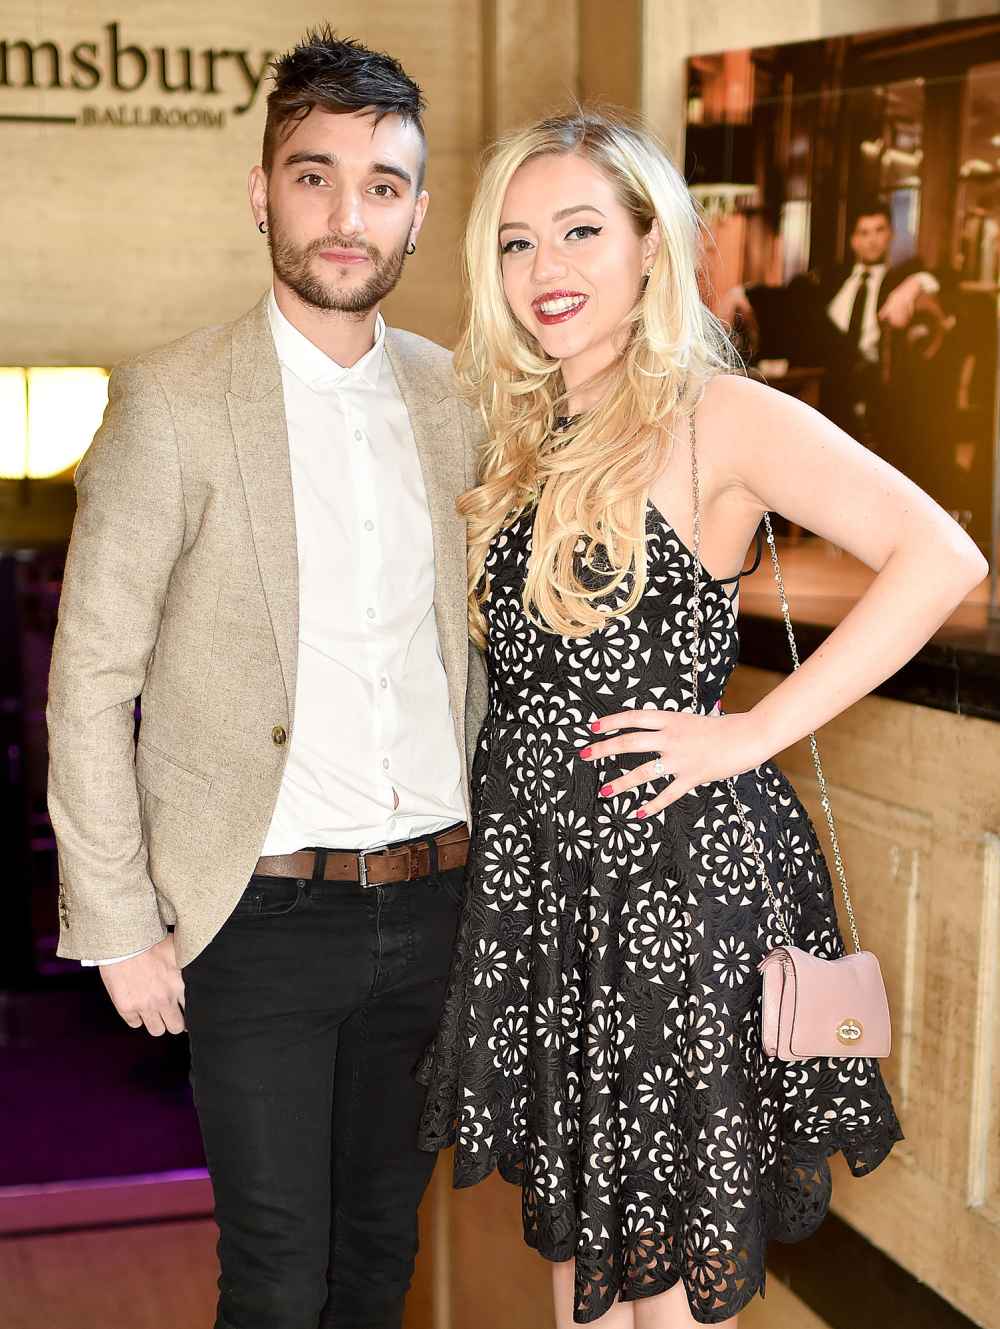 The Wanted Tom Parker Sweetest Photos With His and Wife Kelsey 2 Kids Over the Years